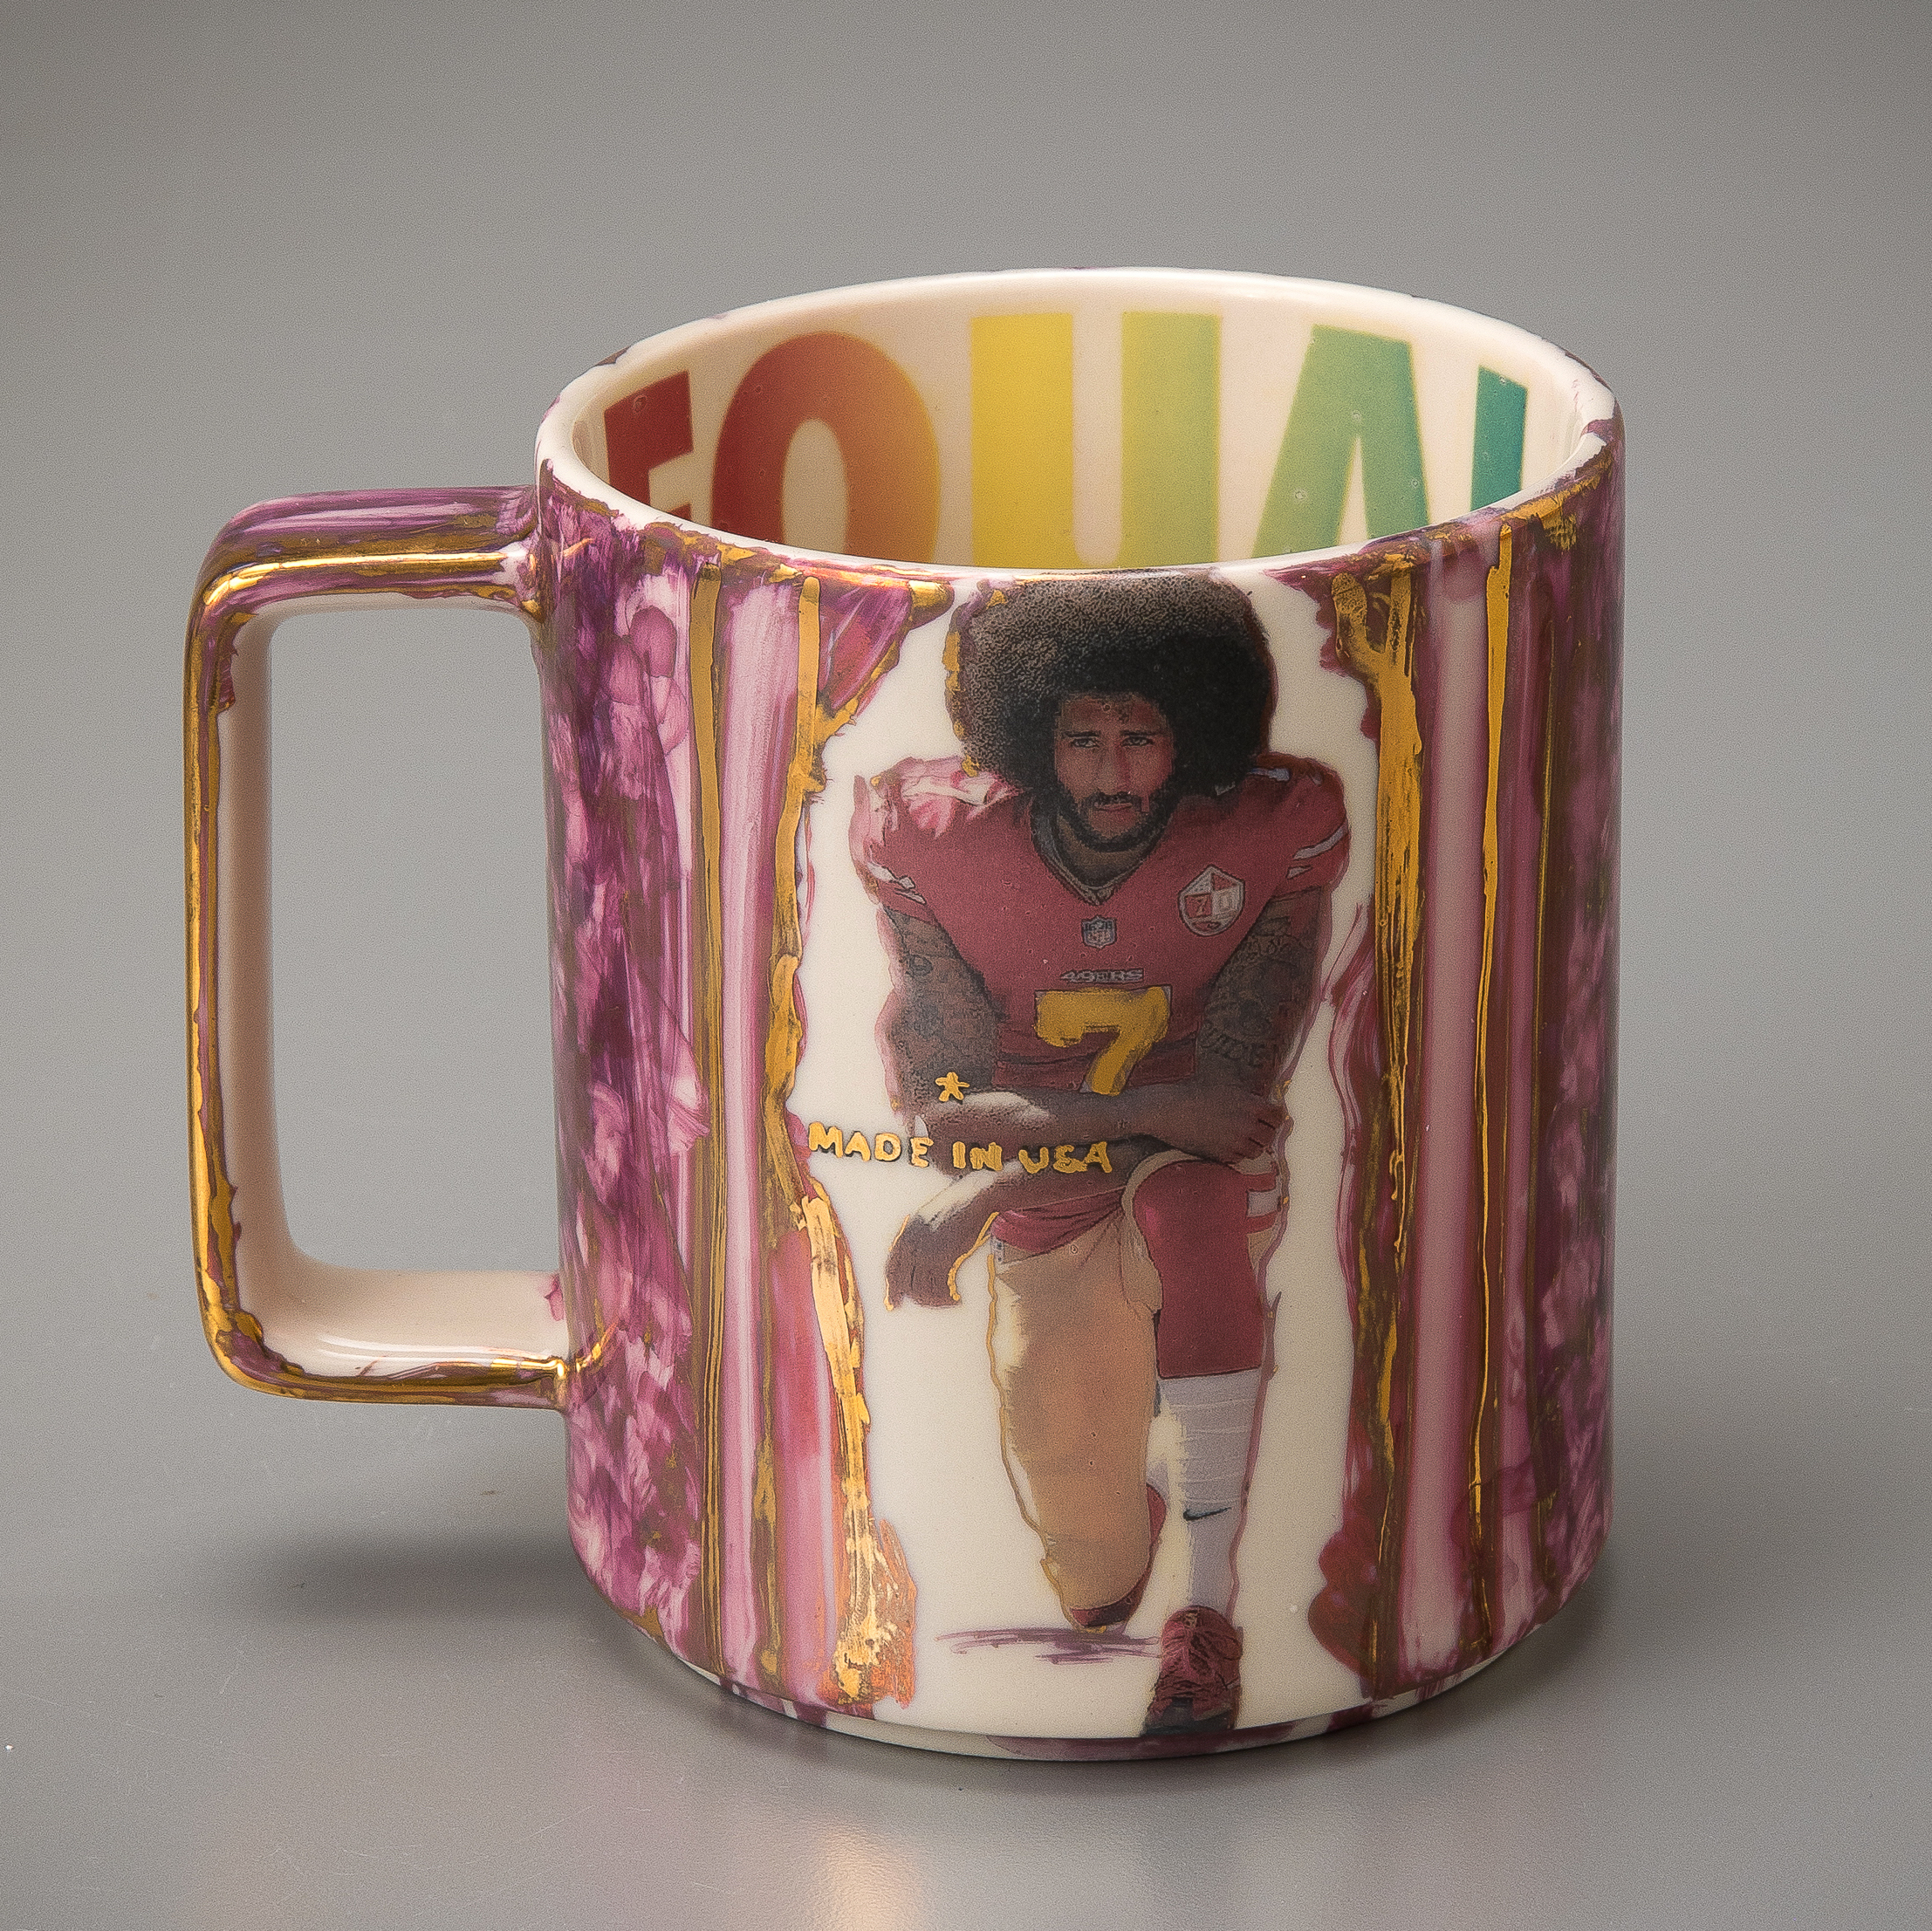 from the <i>MADE IN USA</i> series, 2020, commercial Starbucks “MADE IN USA” mug with artist’s ceramic transfer designs and gold and pink luster enamel, height: 4.5 in. Collection of the Chipstone Foundation.